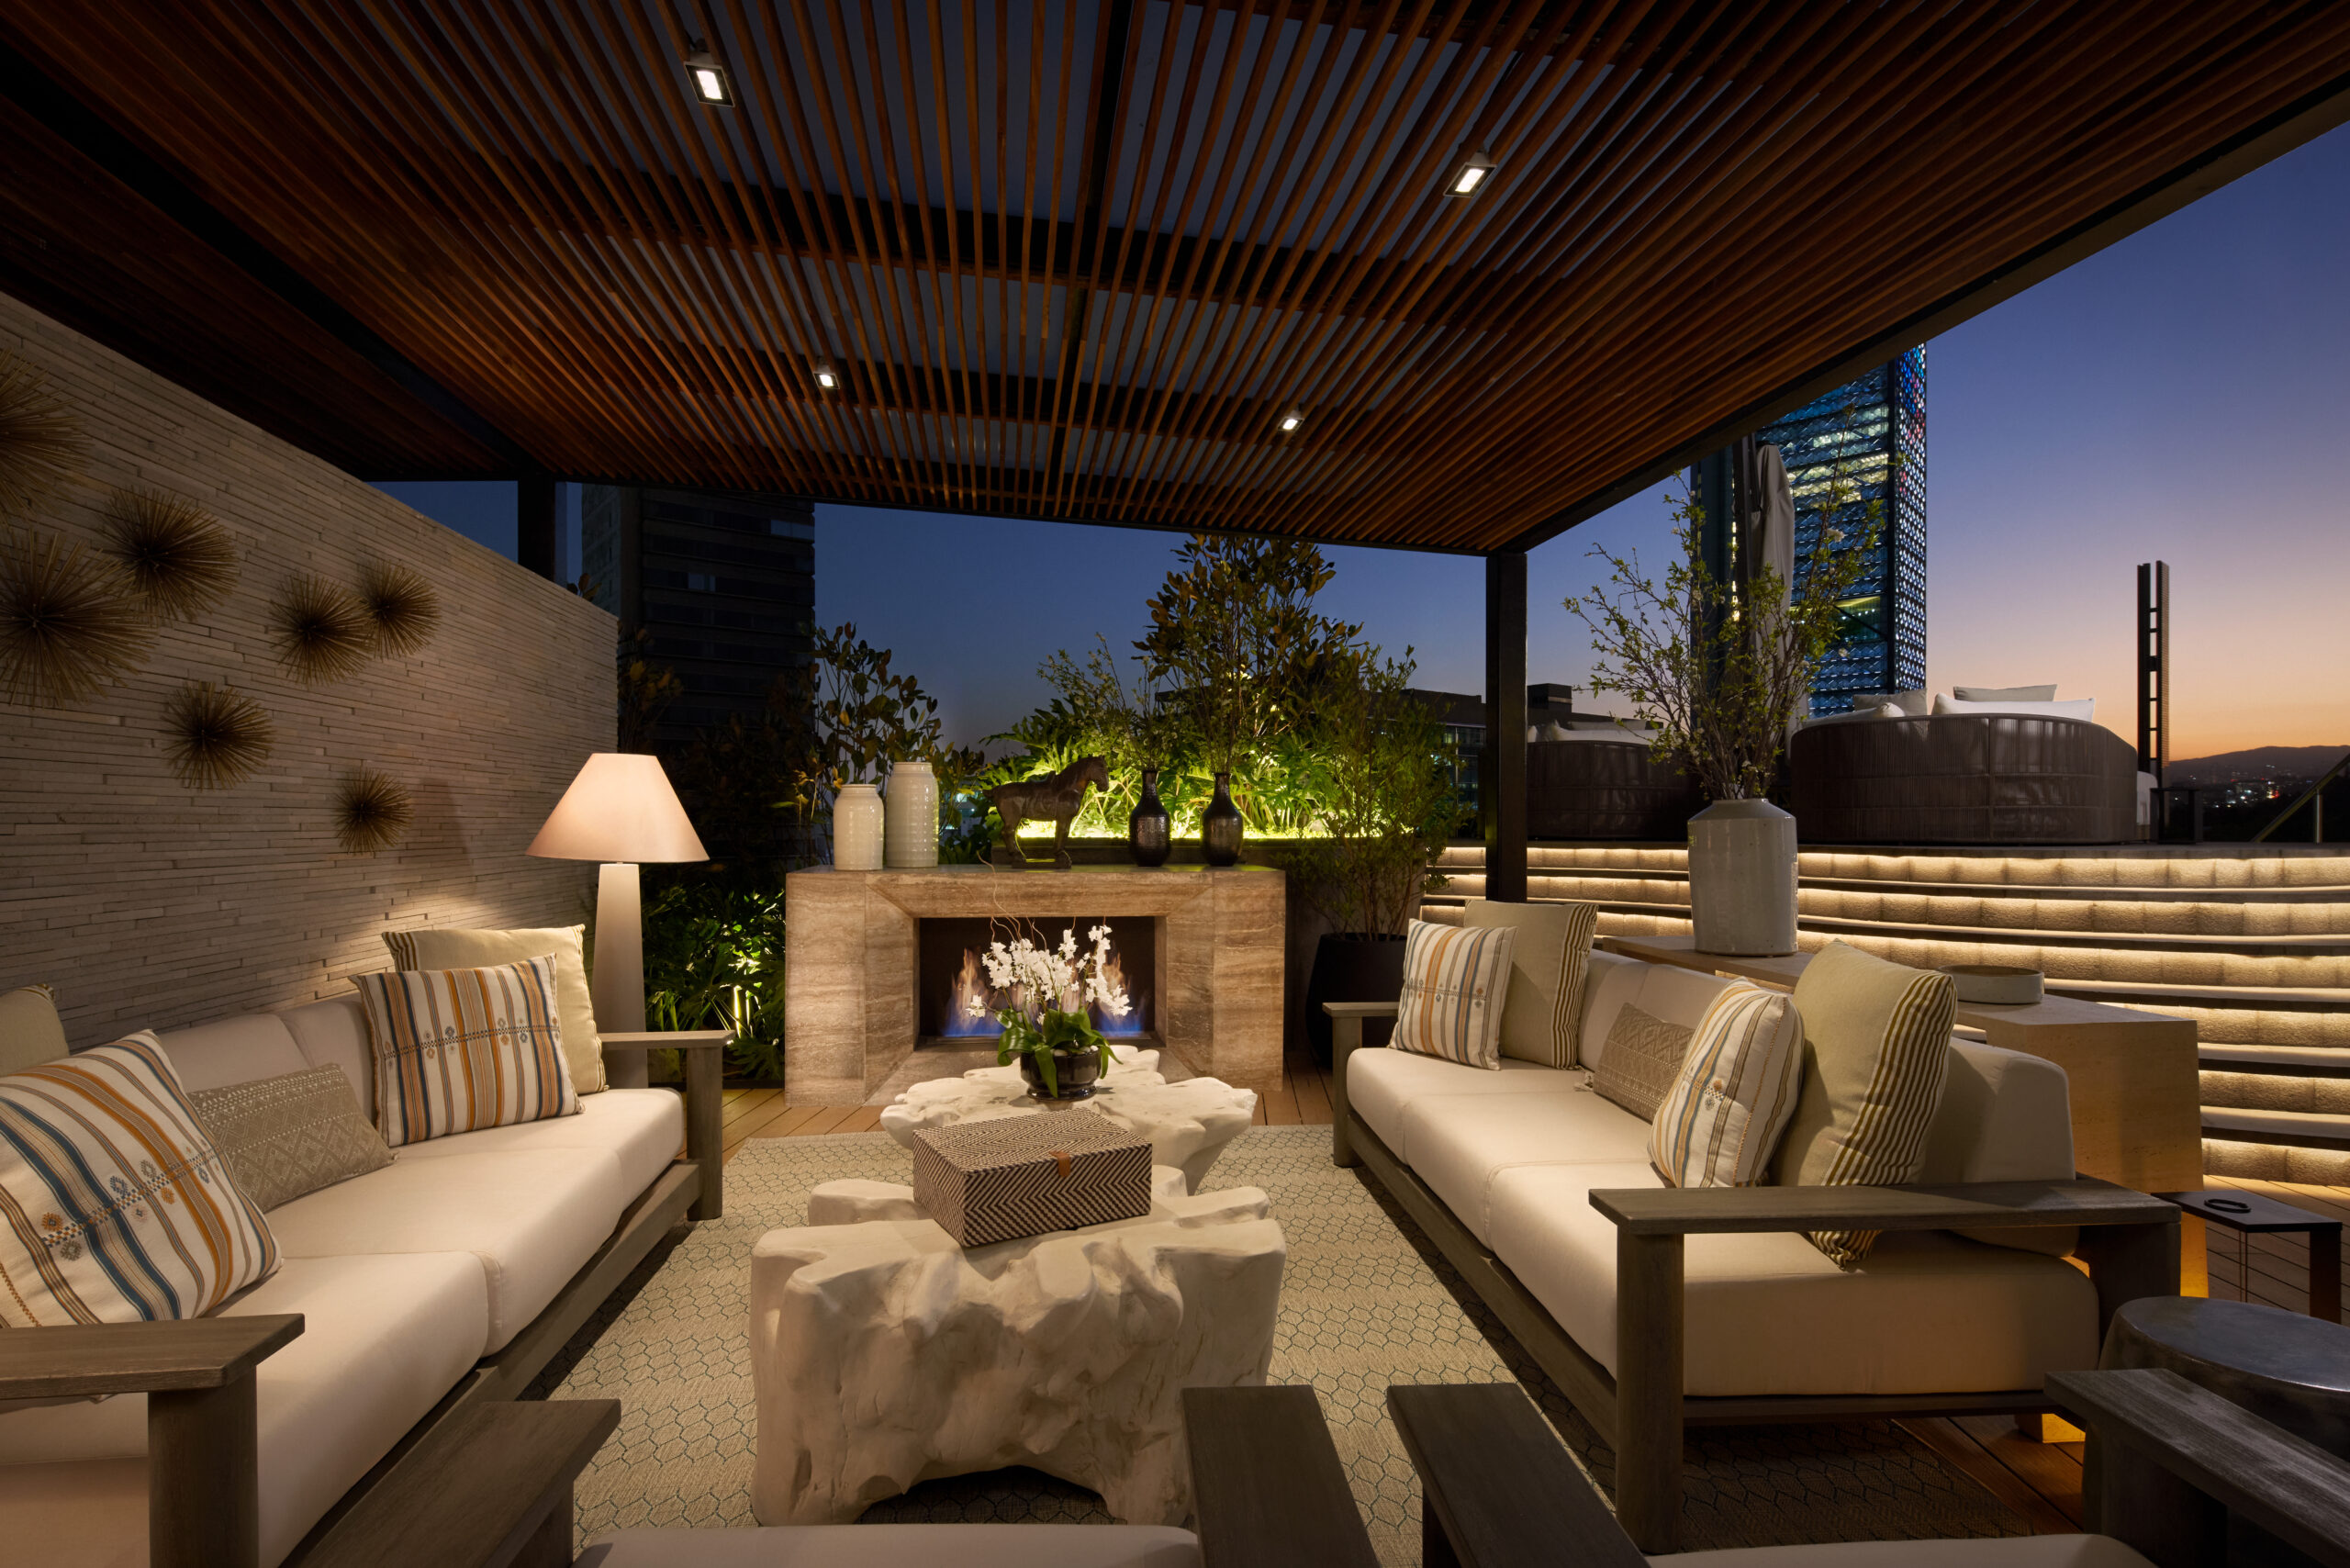 The hospitality landscape in Mexico City is set to reach new heights as The St. Regis Mexico City proudly announces the launch of its highly anticipated Garden Terrace Rooms & Suites. This groundbreaking addition, consisting of eight lavish suites, marks a milestone in luxury accommodation in the heart of Mexico City.